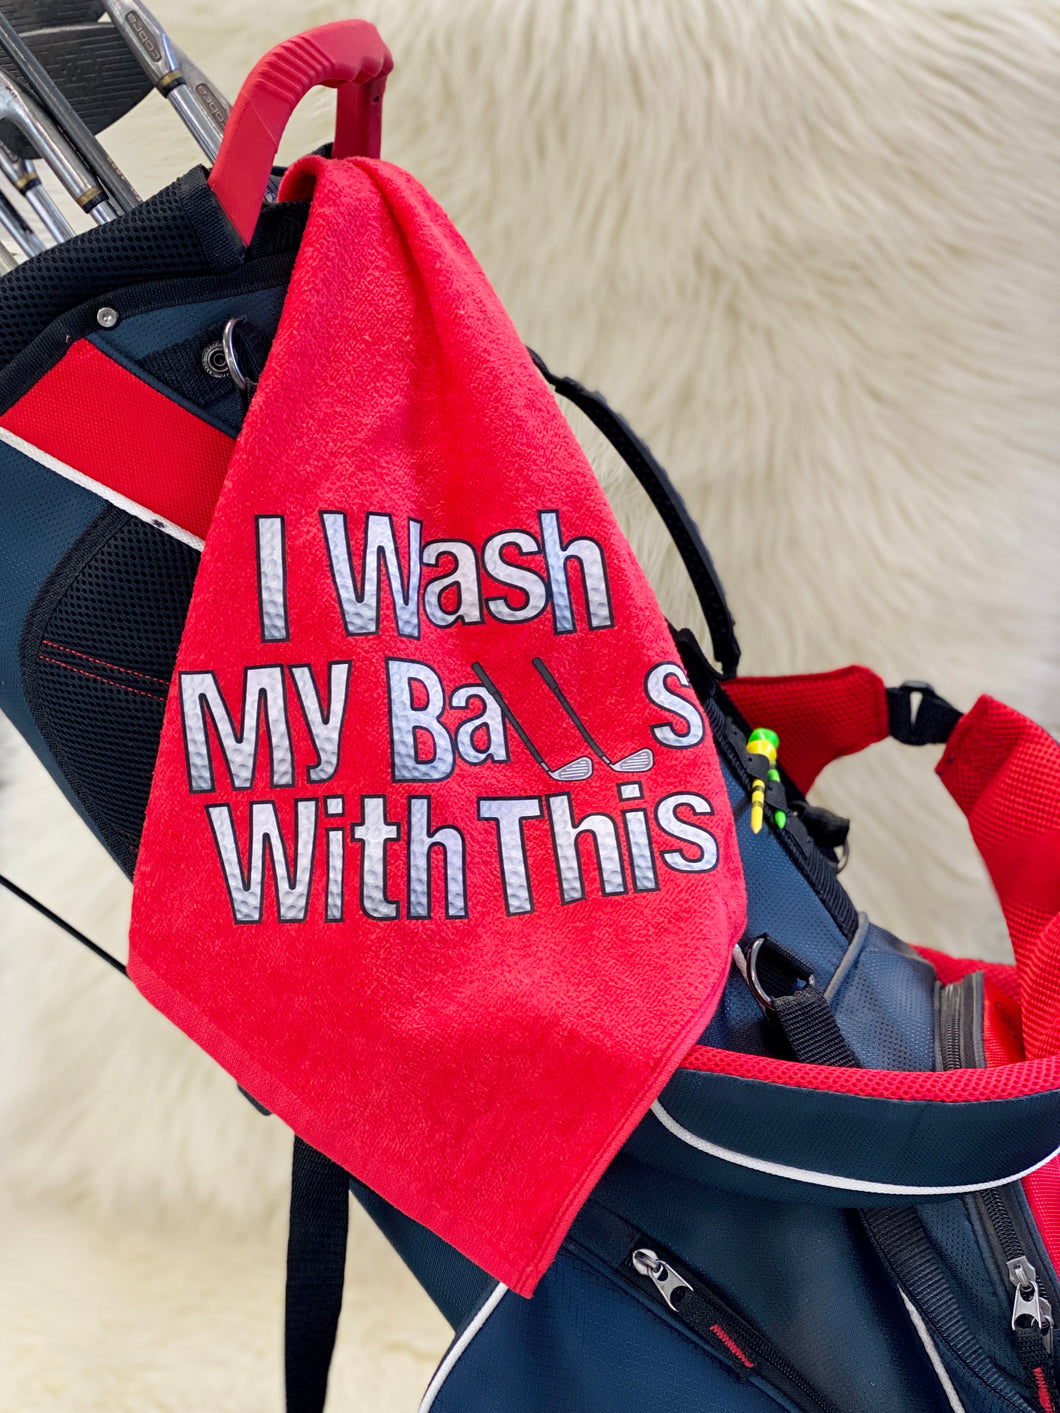 I Wash My Balls With This Golf Towel Introducing the ultimate golf accessory for the man who takes his game seriously - the 